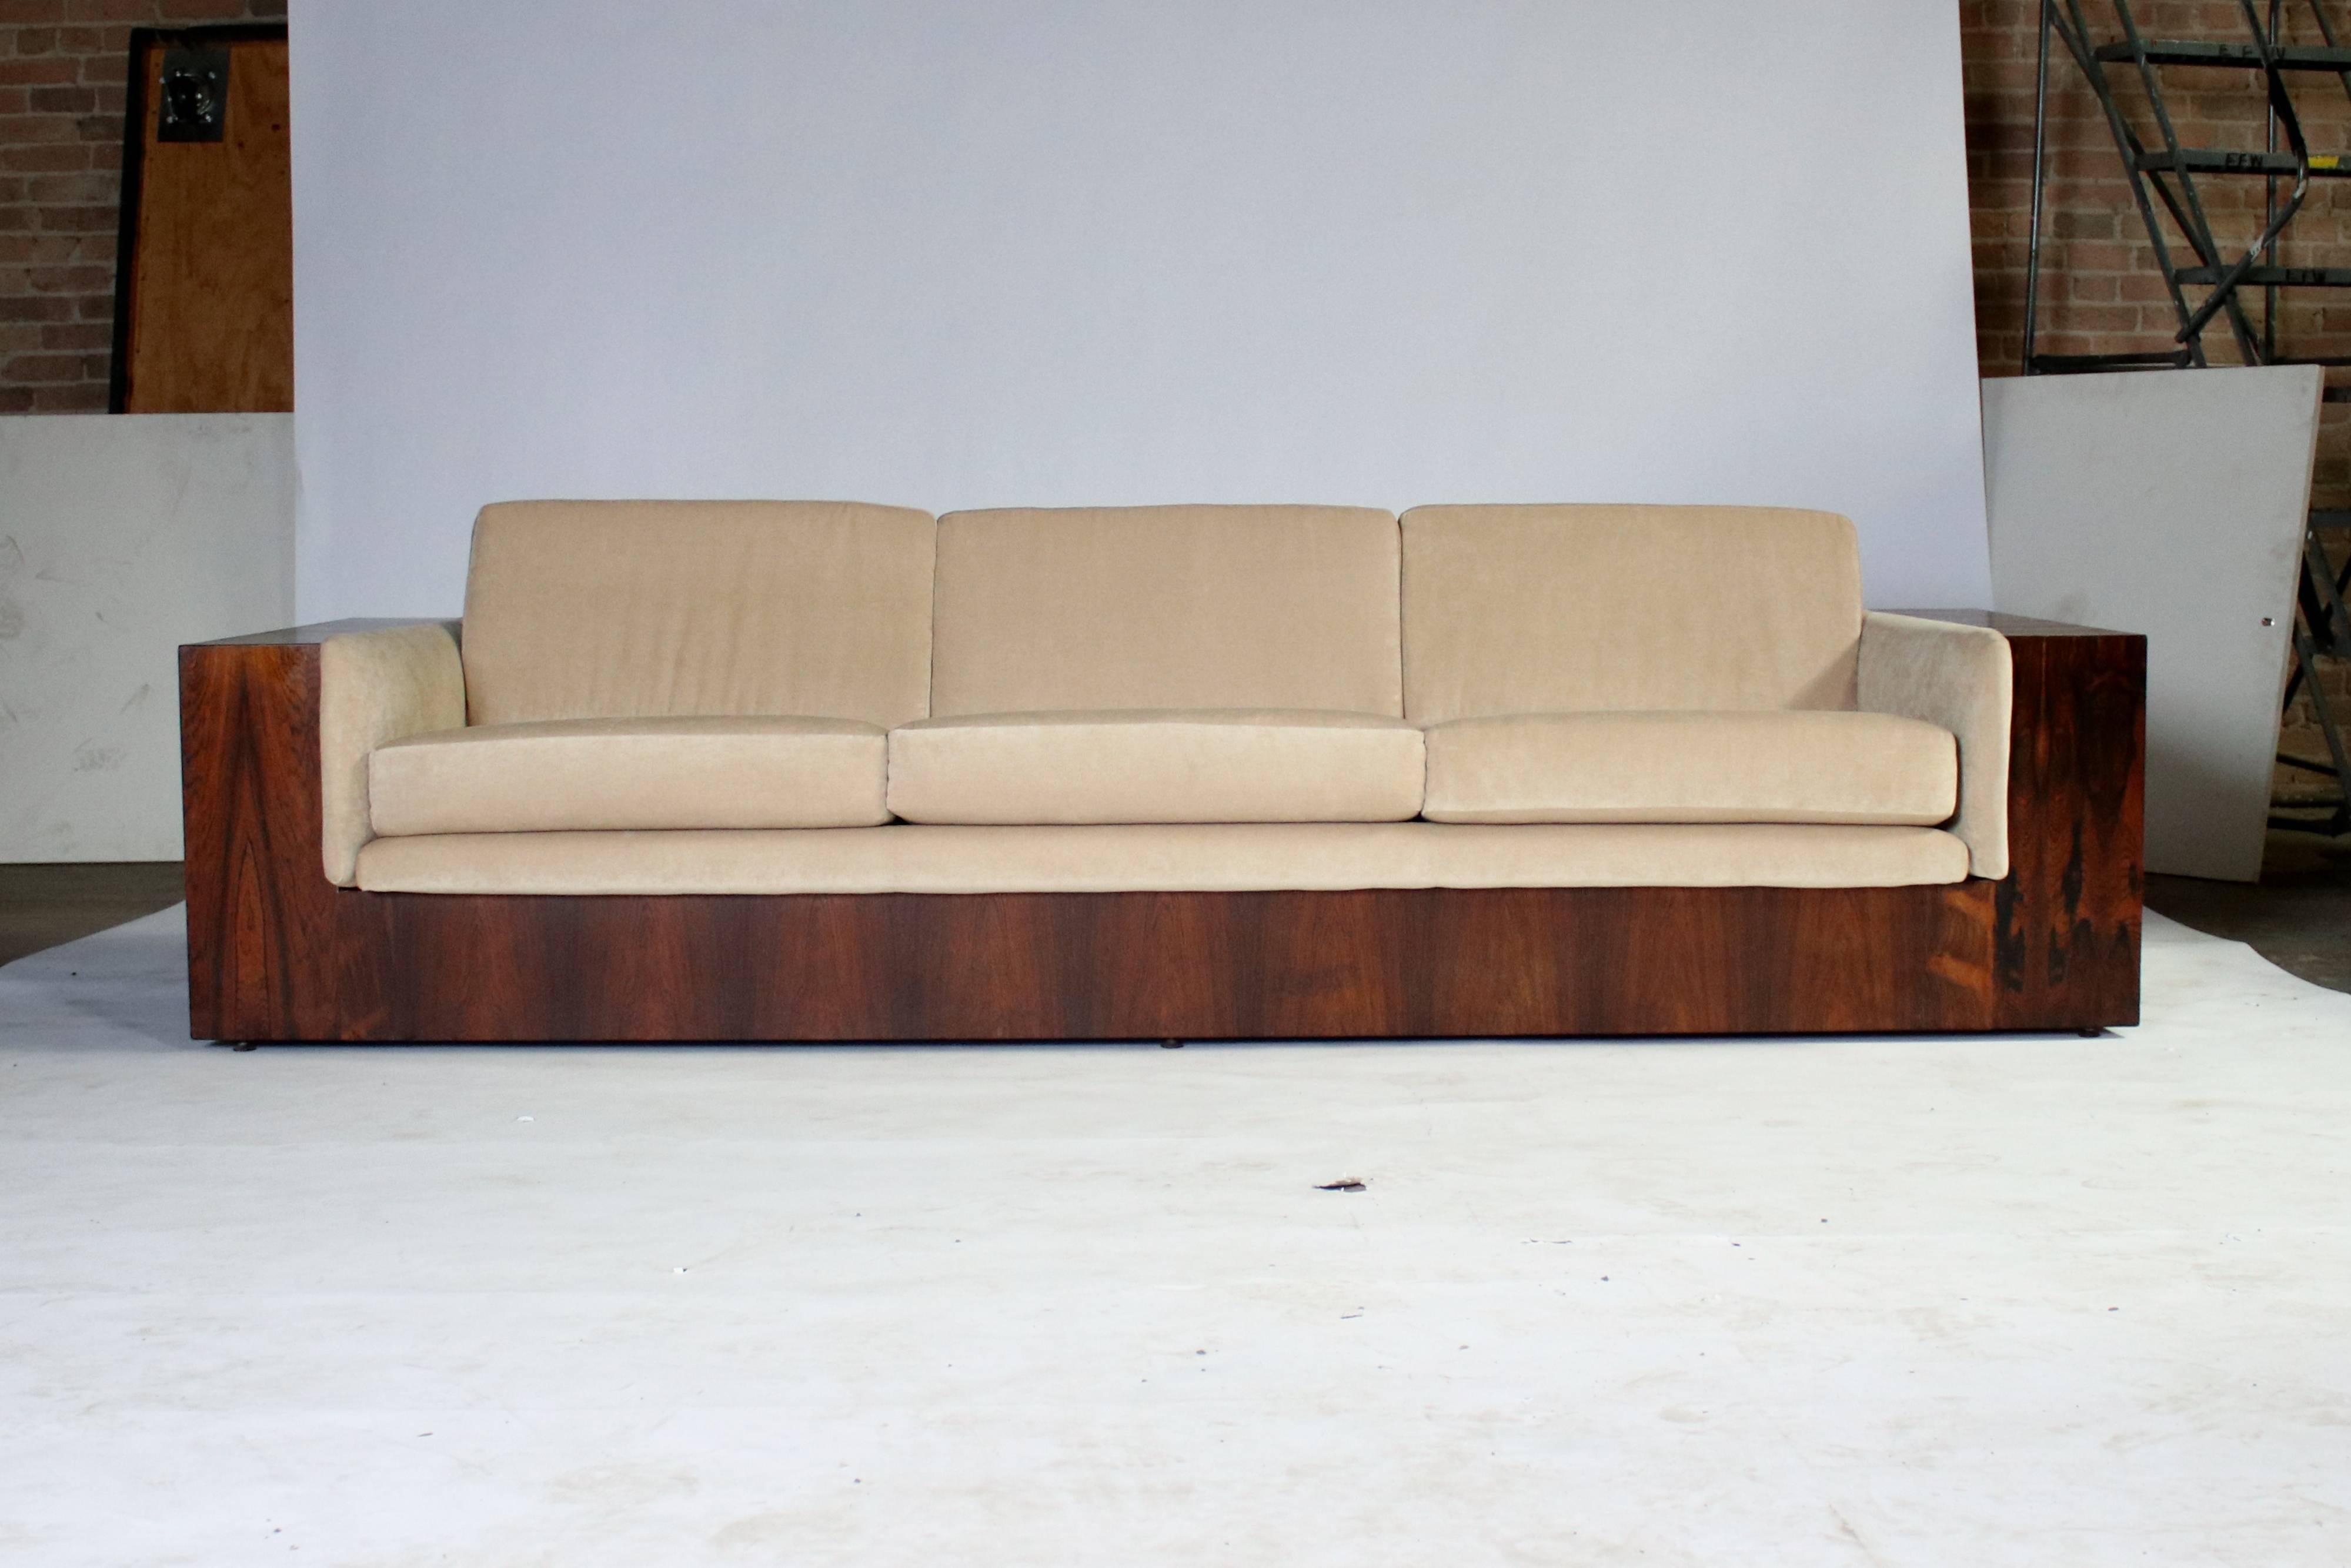 1970s Milo Baughman three-seat case sofa in Brazilian rosewood for Thayer Coggin with removable beige upholstered cushions.